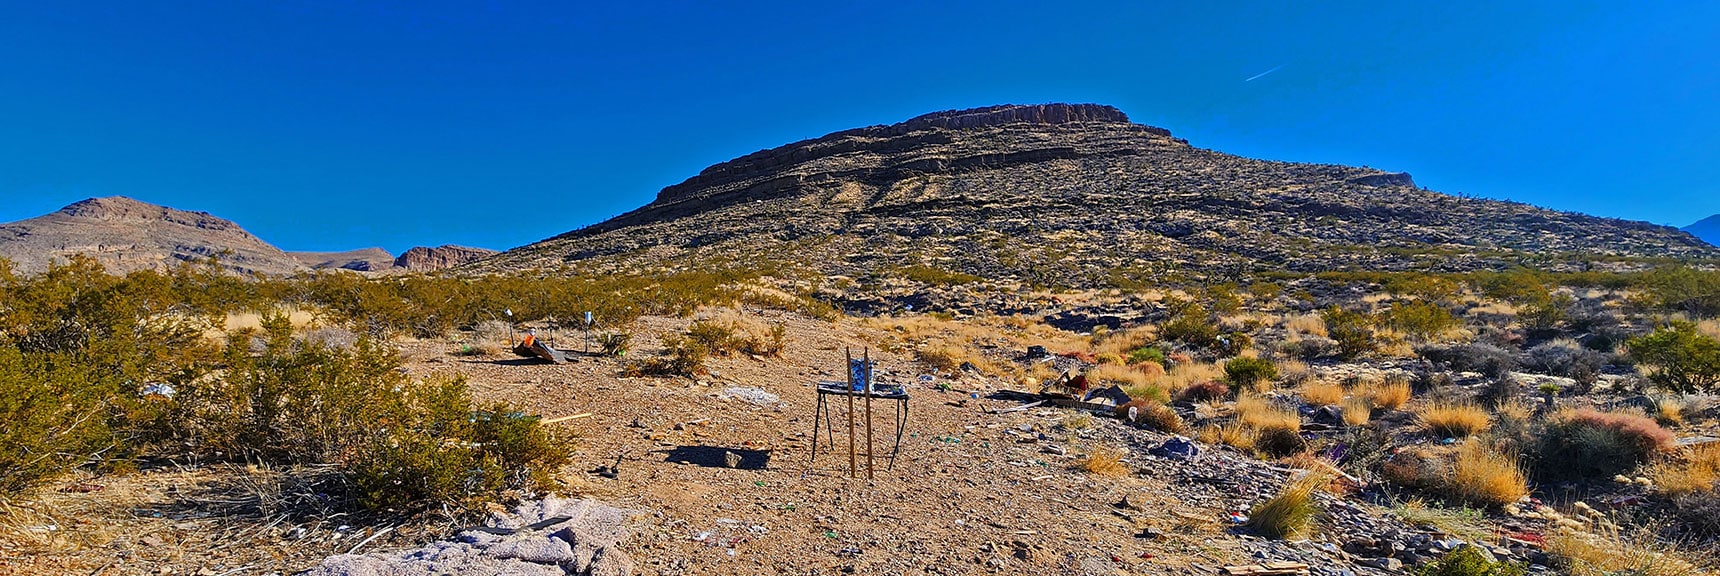 One of Many Makeshift Gun Ranges on South and Lower West Side of Bluff | Landmark Bluff Summit | Lovell Canyon, Nevada